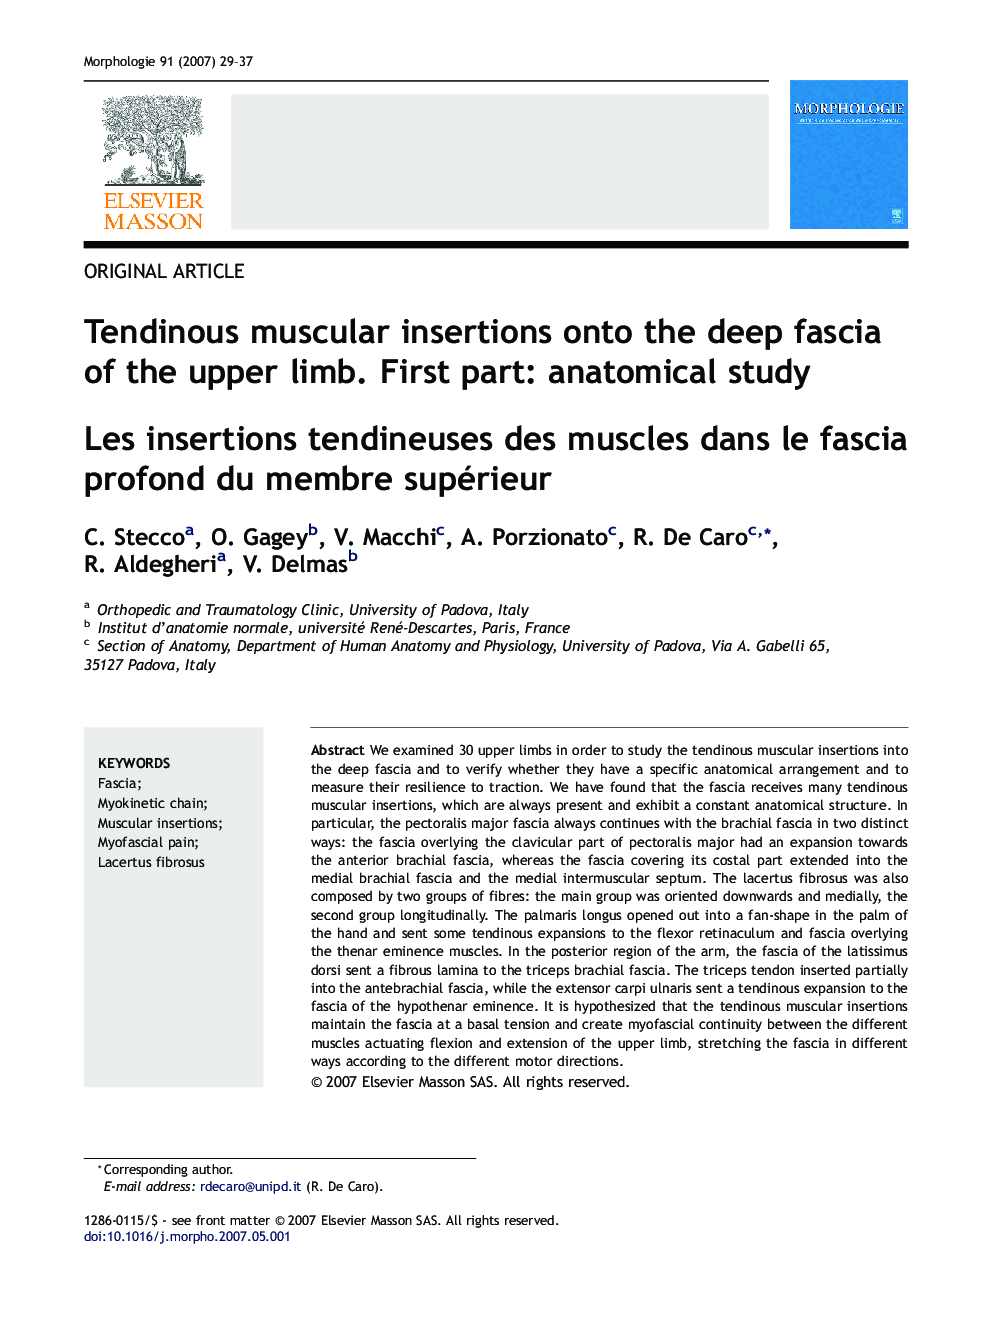 Tendinous muscular insertions onto theÂ deep fascia ofÂ theÂ upper limb. First part: anatomical study